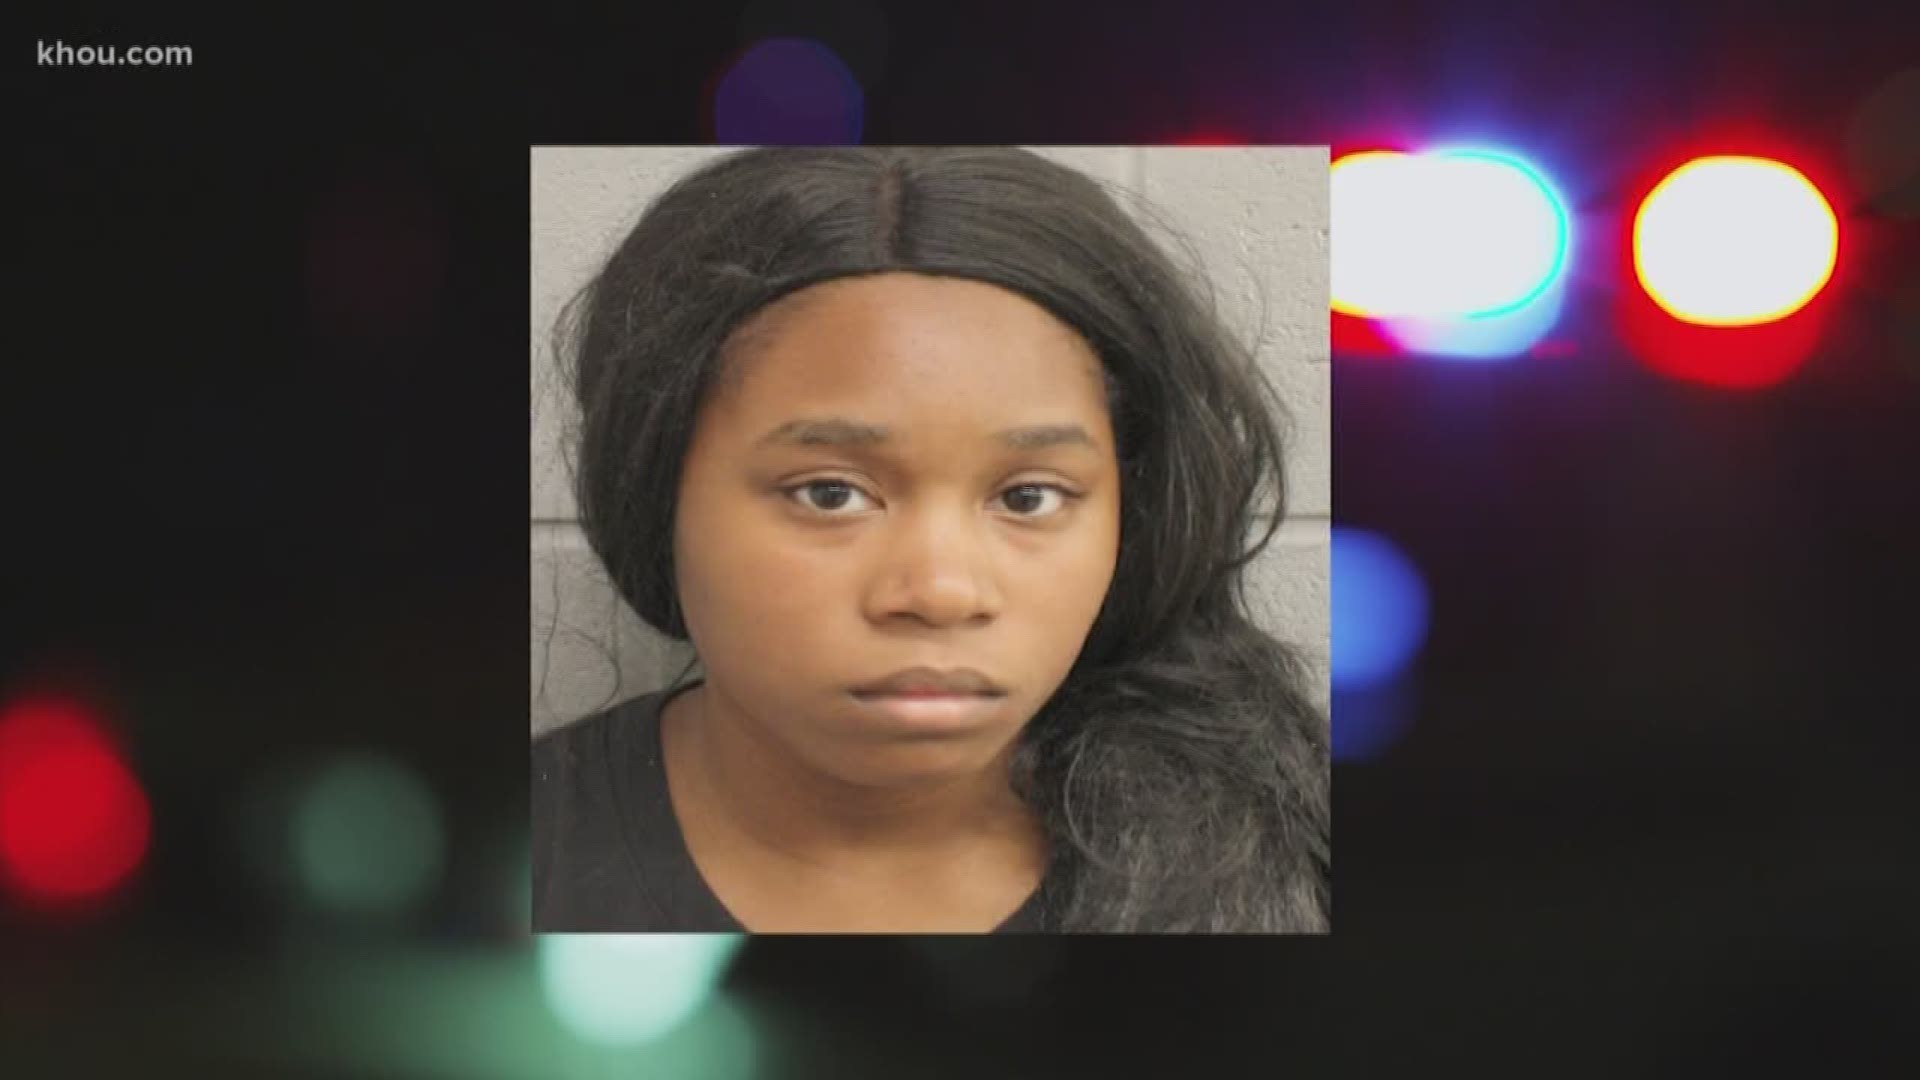 A young woman has been charged after she tried to kill her baby twice, according to court documents.
Meredith Nicole Deen, 20, has been charged with attempt to commit capital murder.